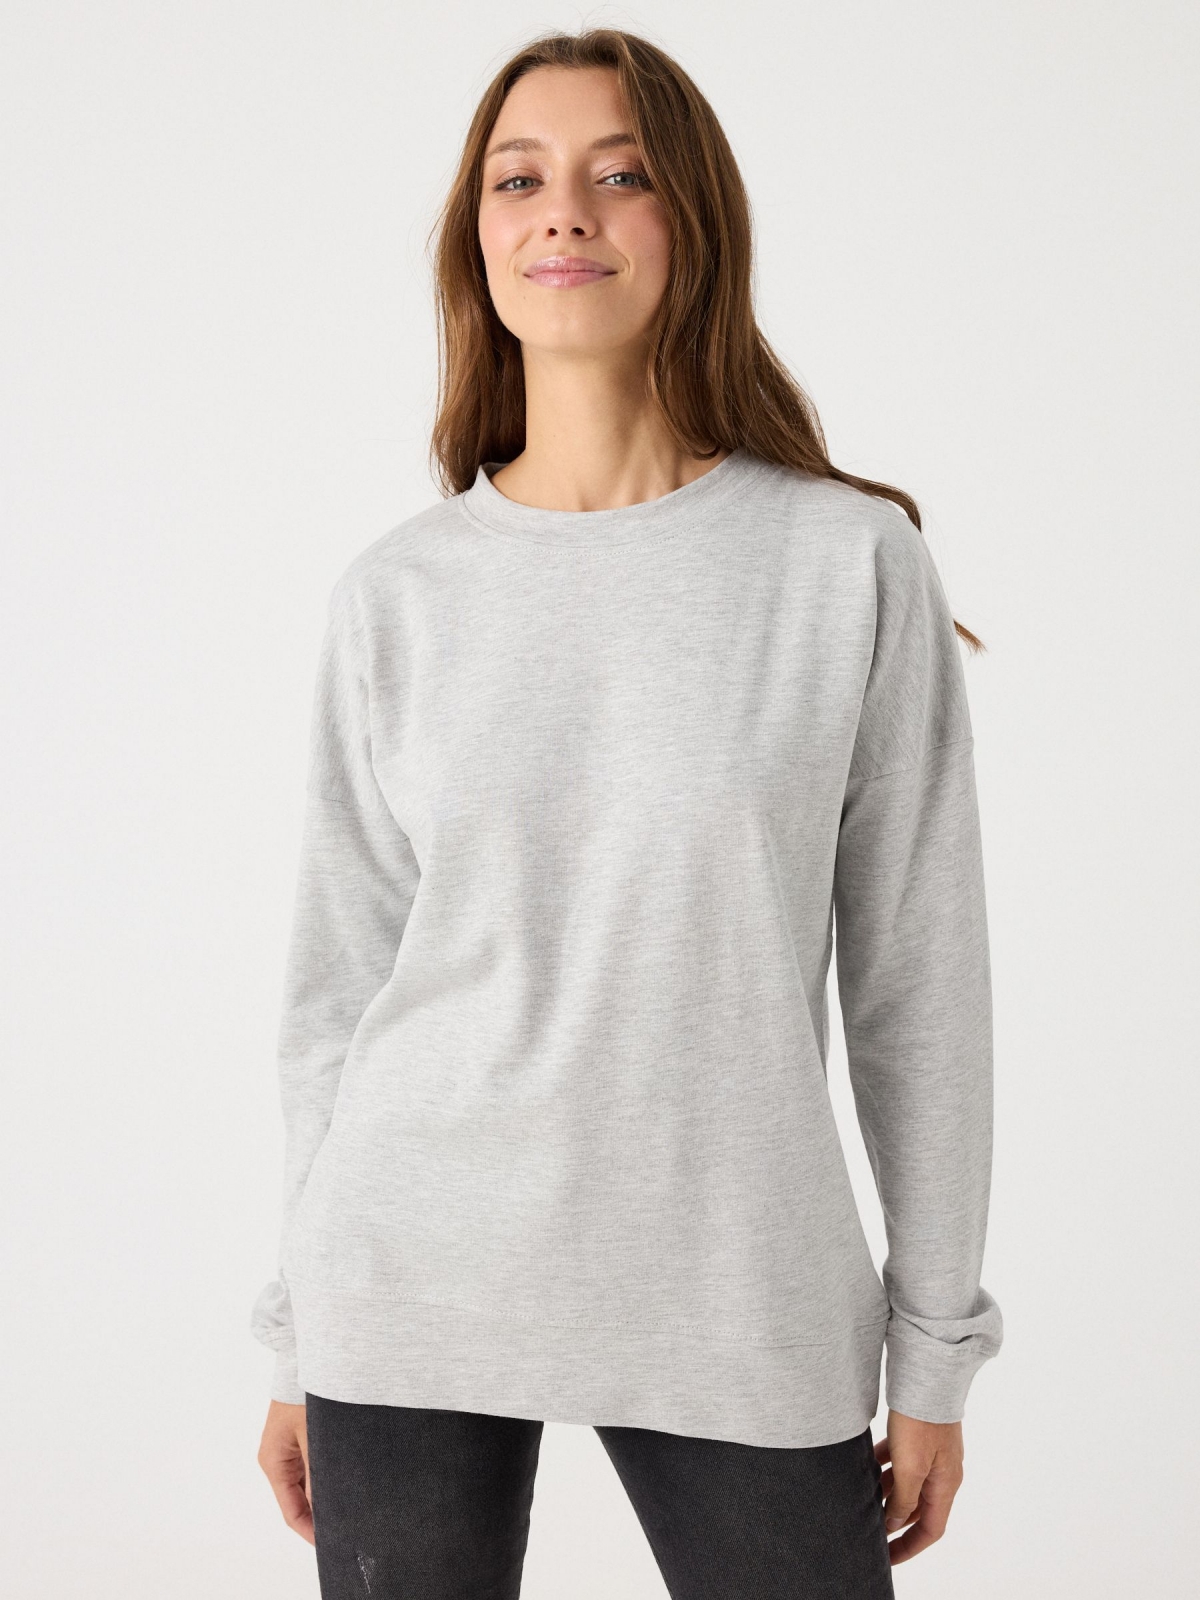 Basic sweatshirt grey middle front view